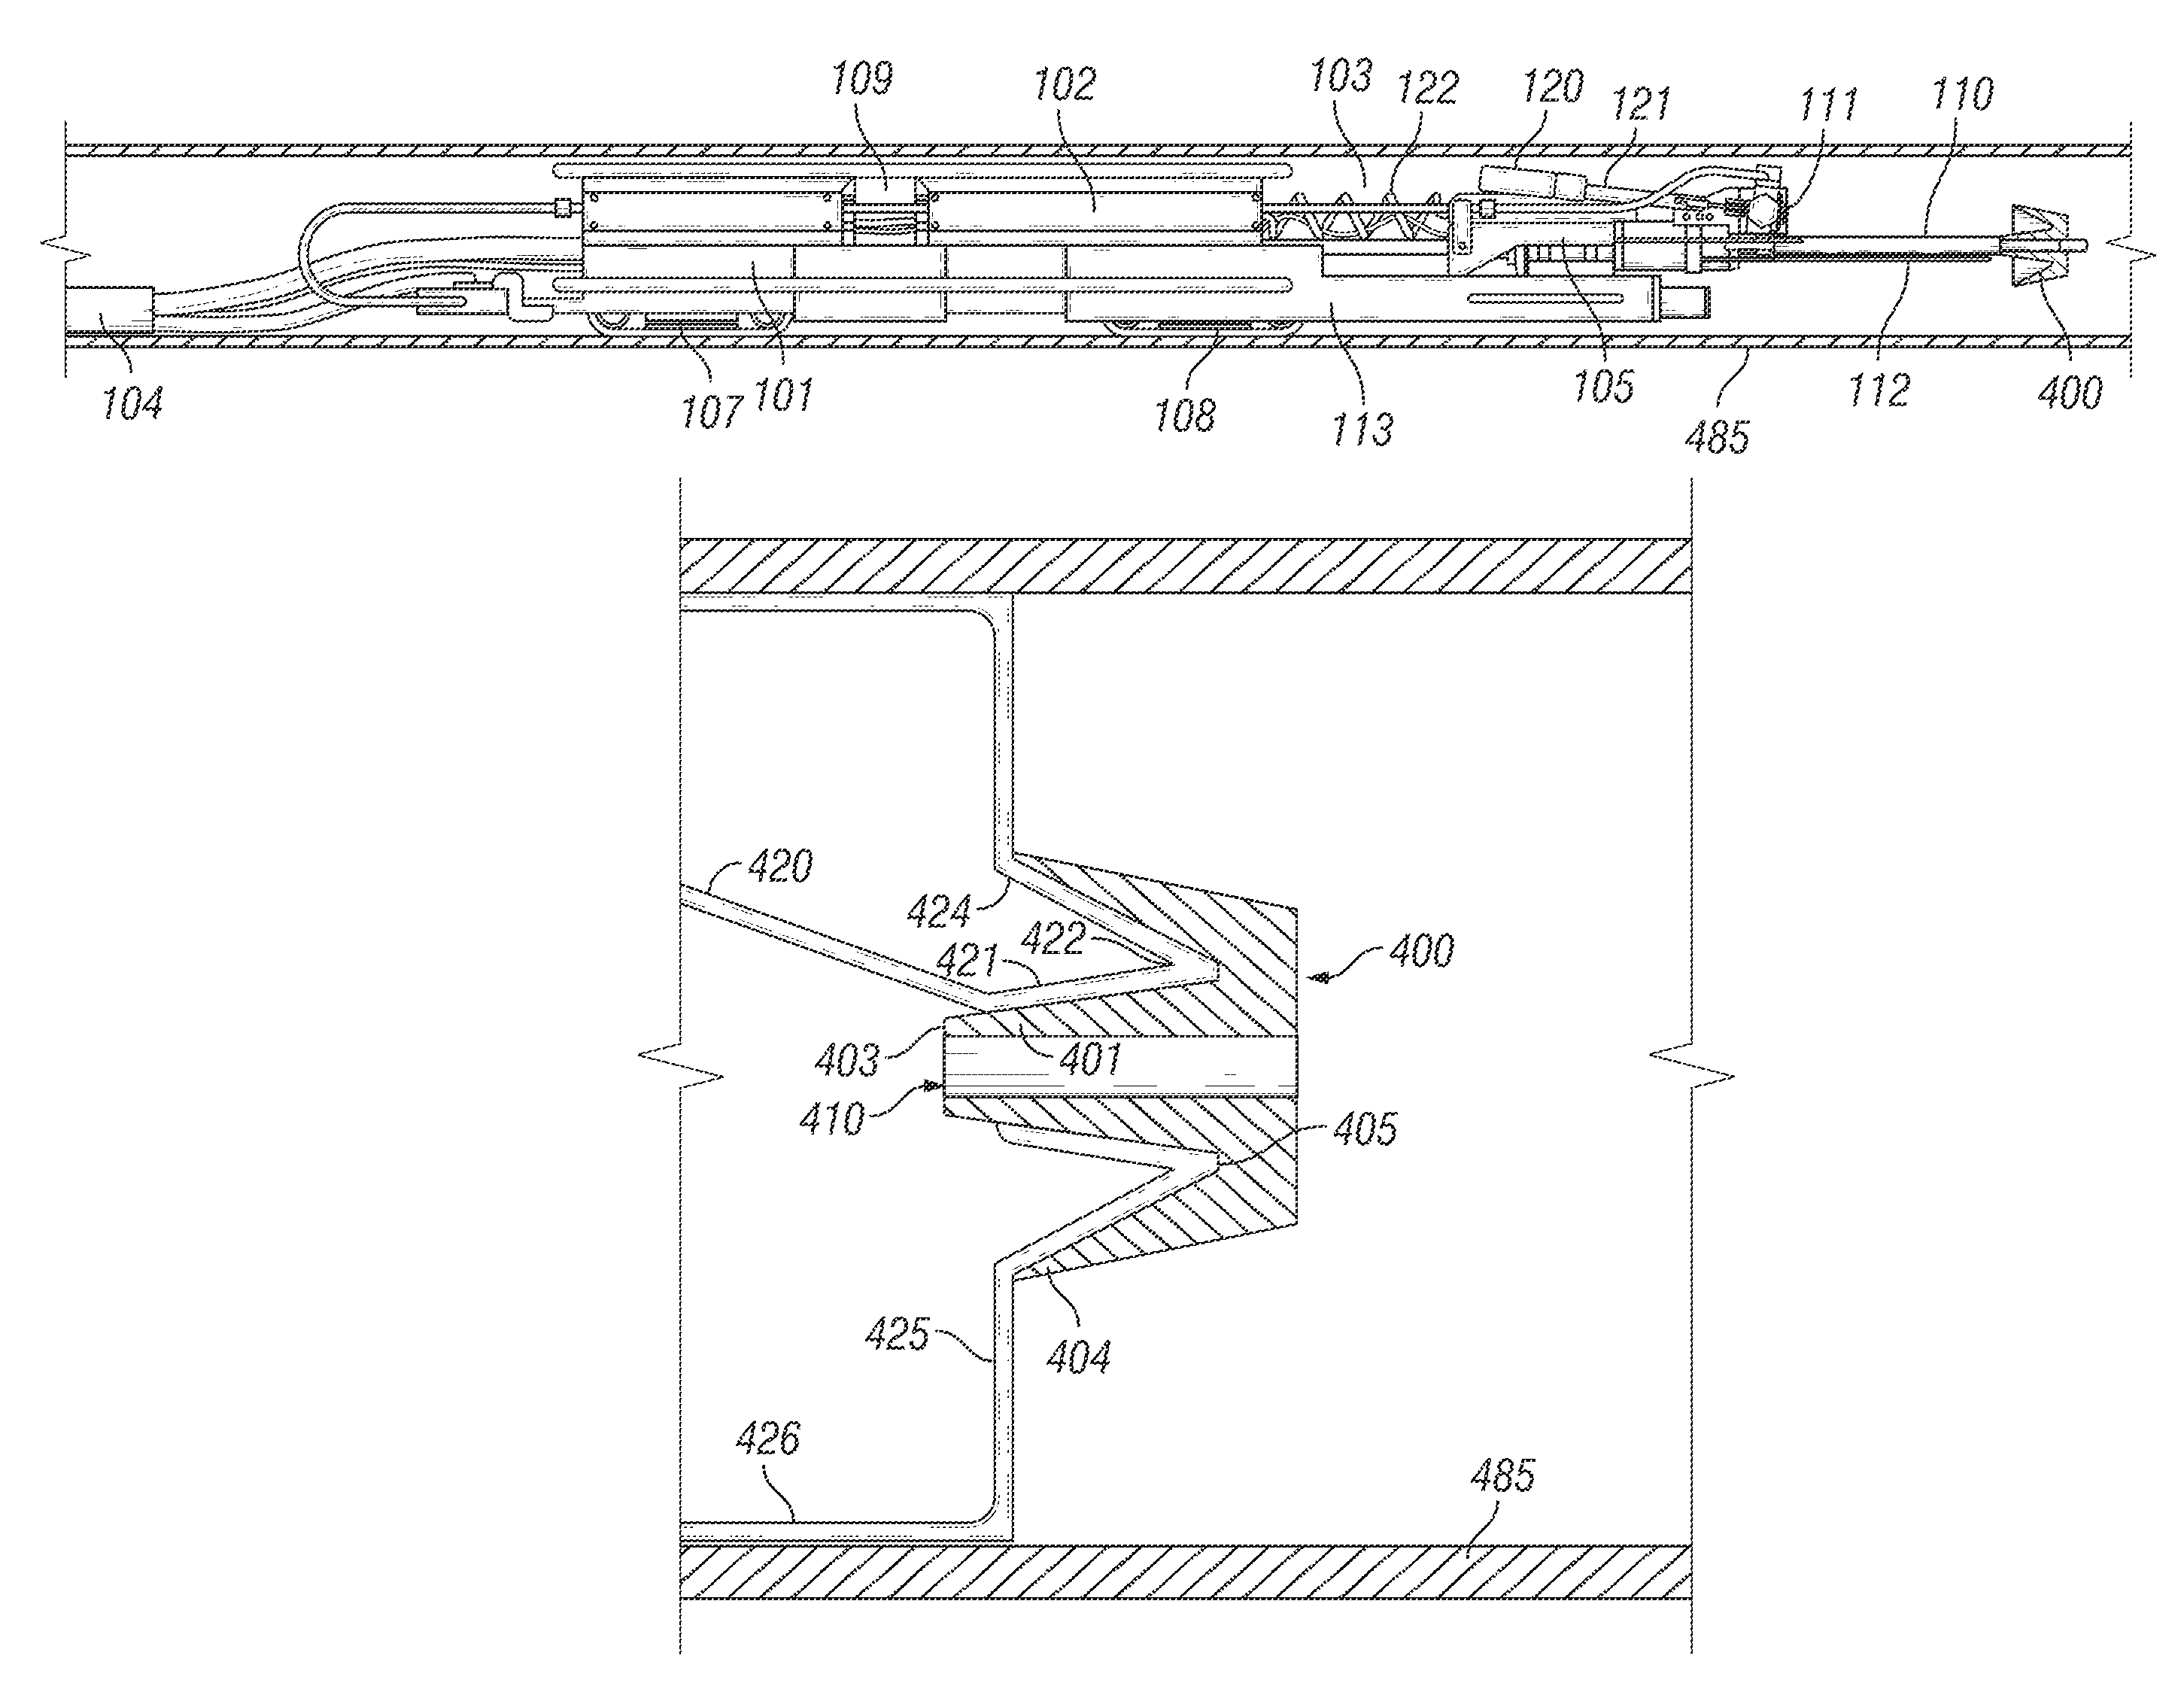 Method and apparatus of lining pipes with environmentally compatible impervious membrane